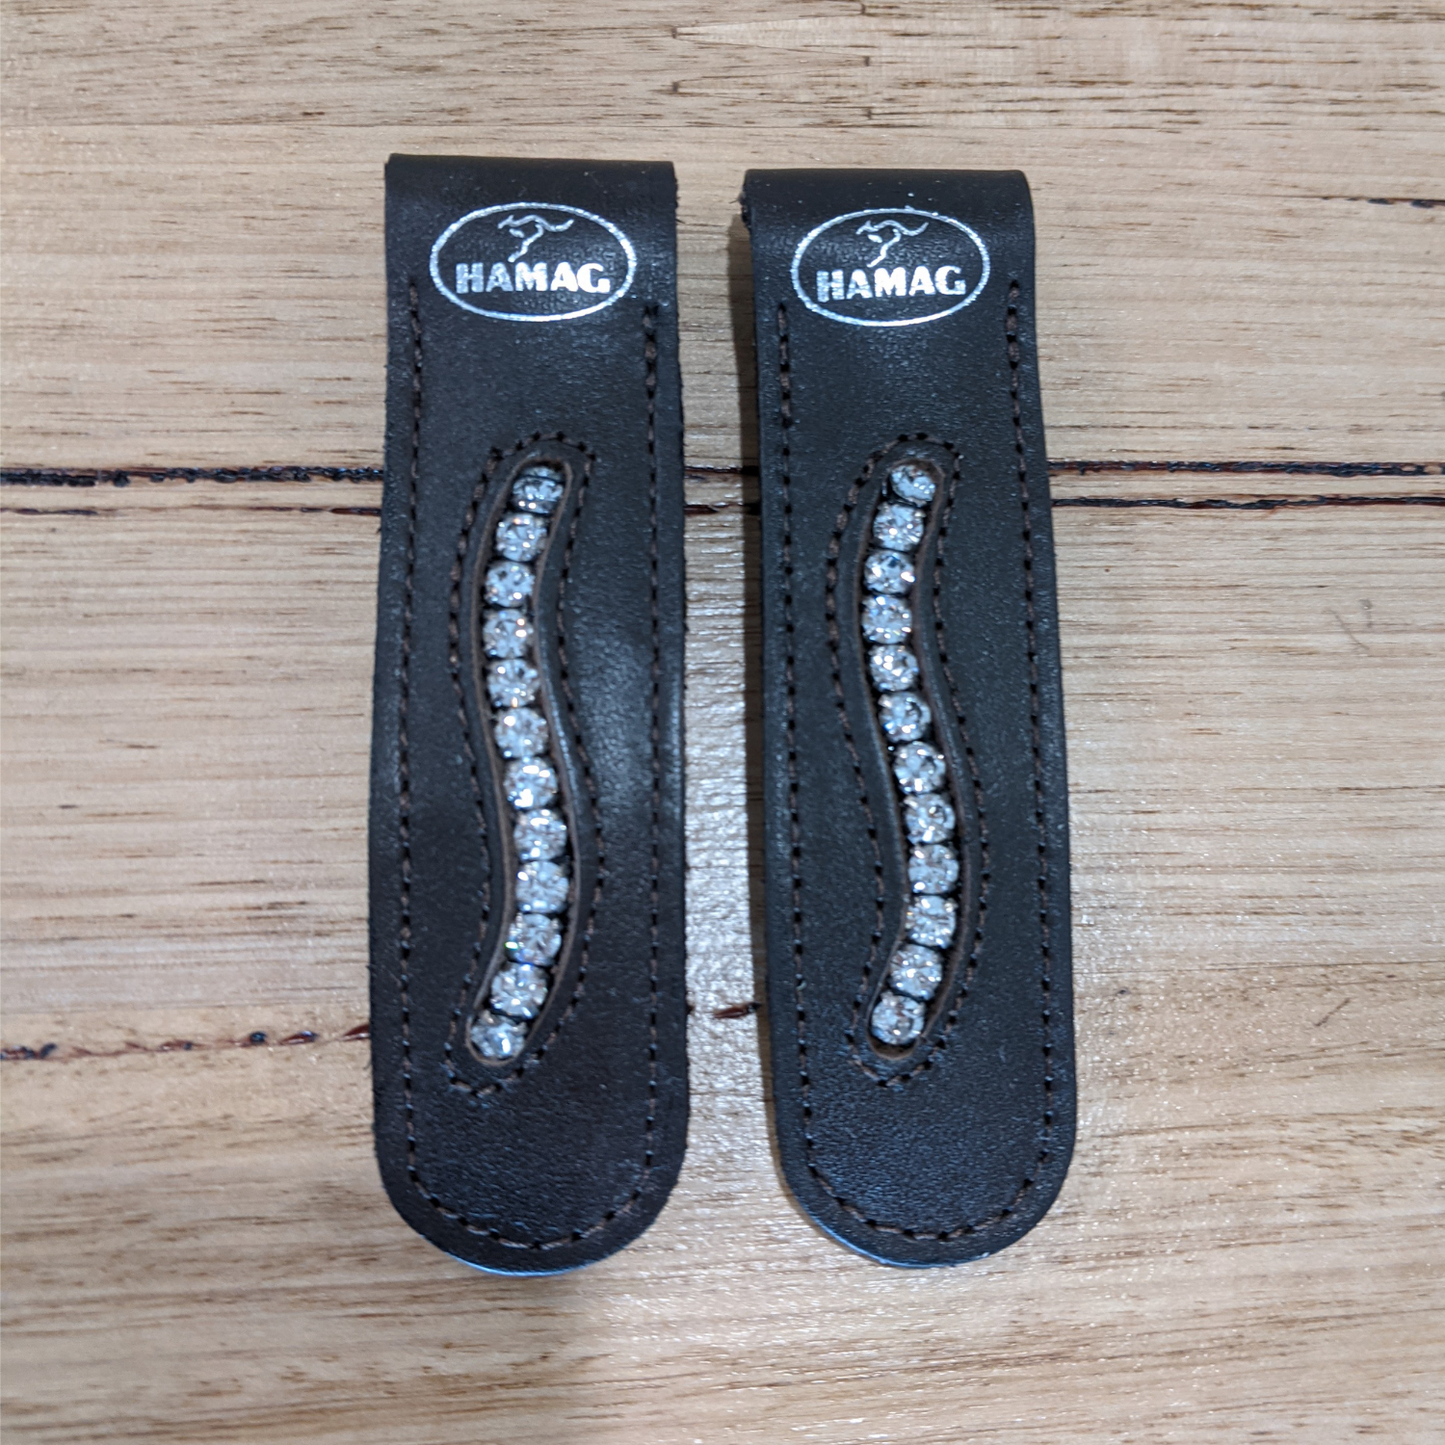 Hamag Leather Boot Clips